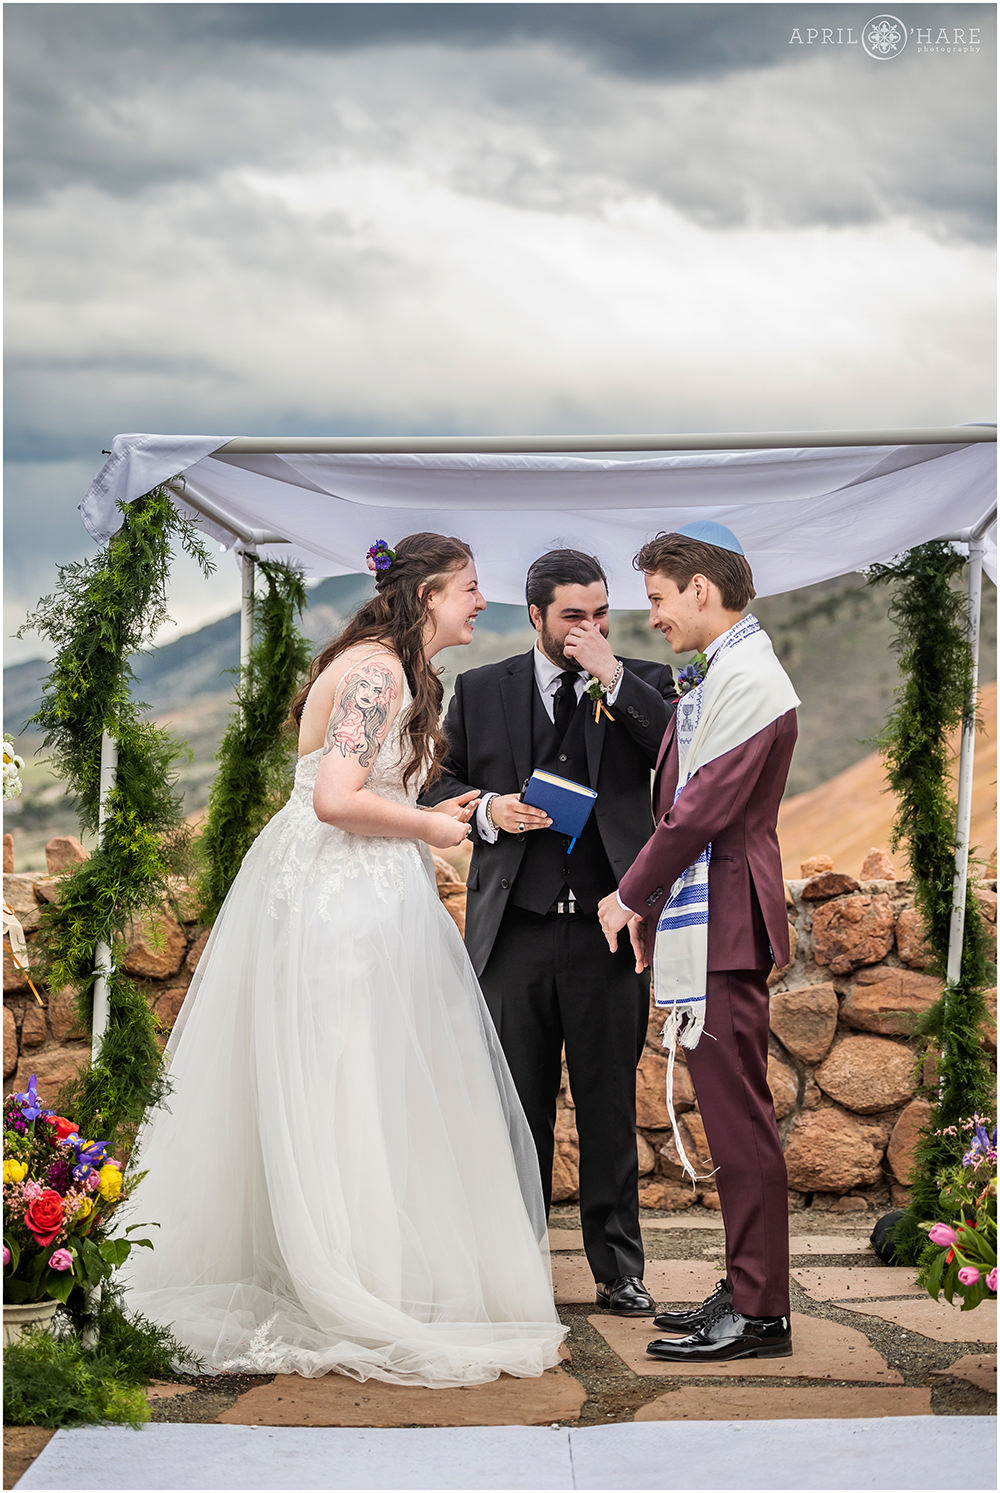 Bride and groom laugh together during their wedding ceremony at the Red Rocks Trading Post Backyard